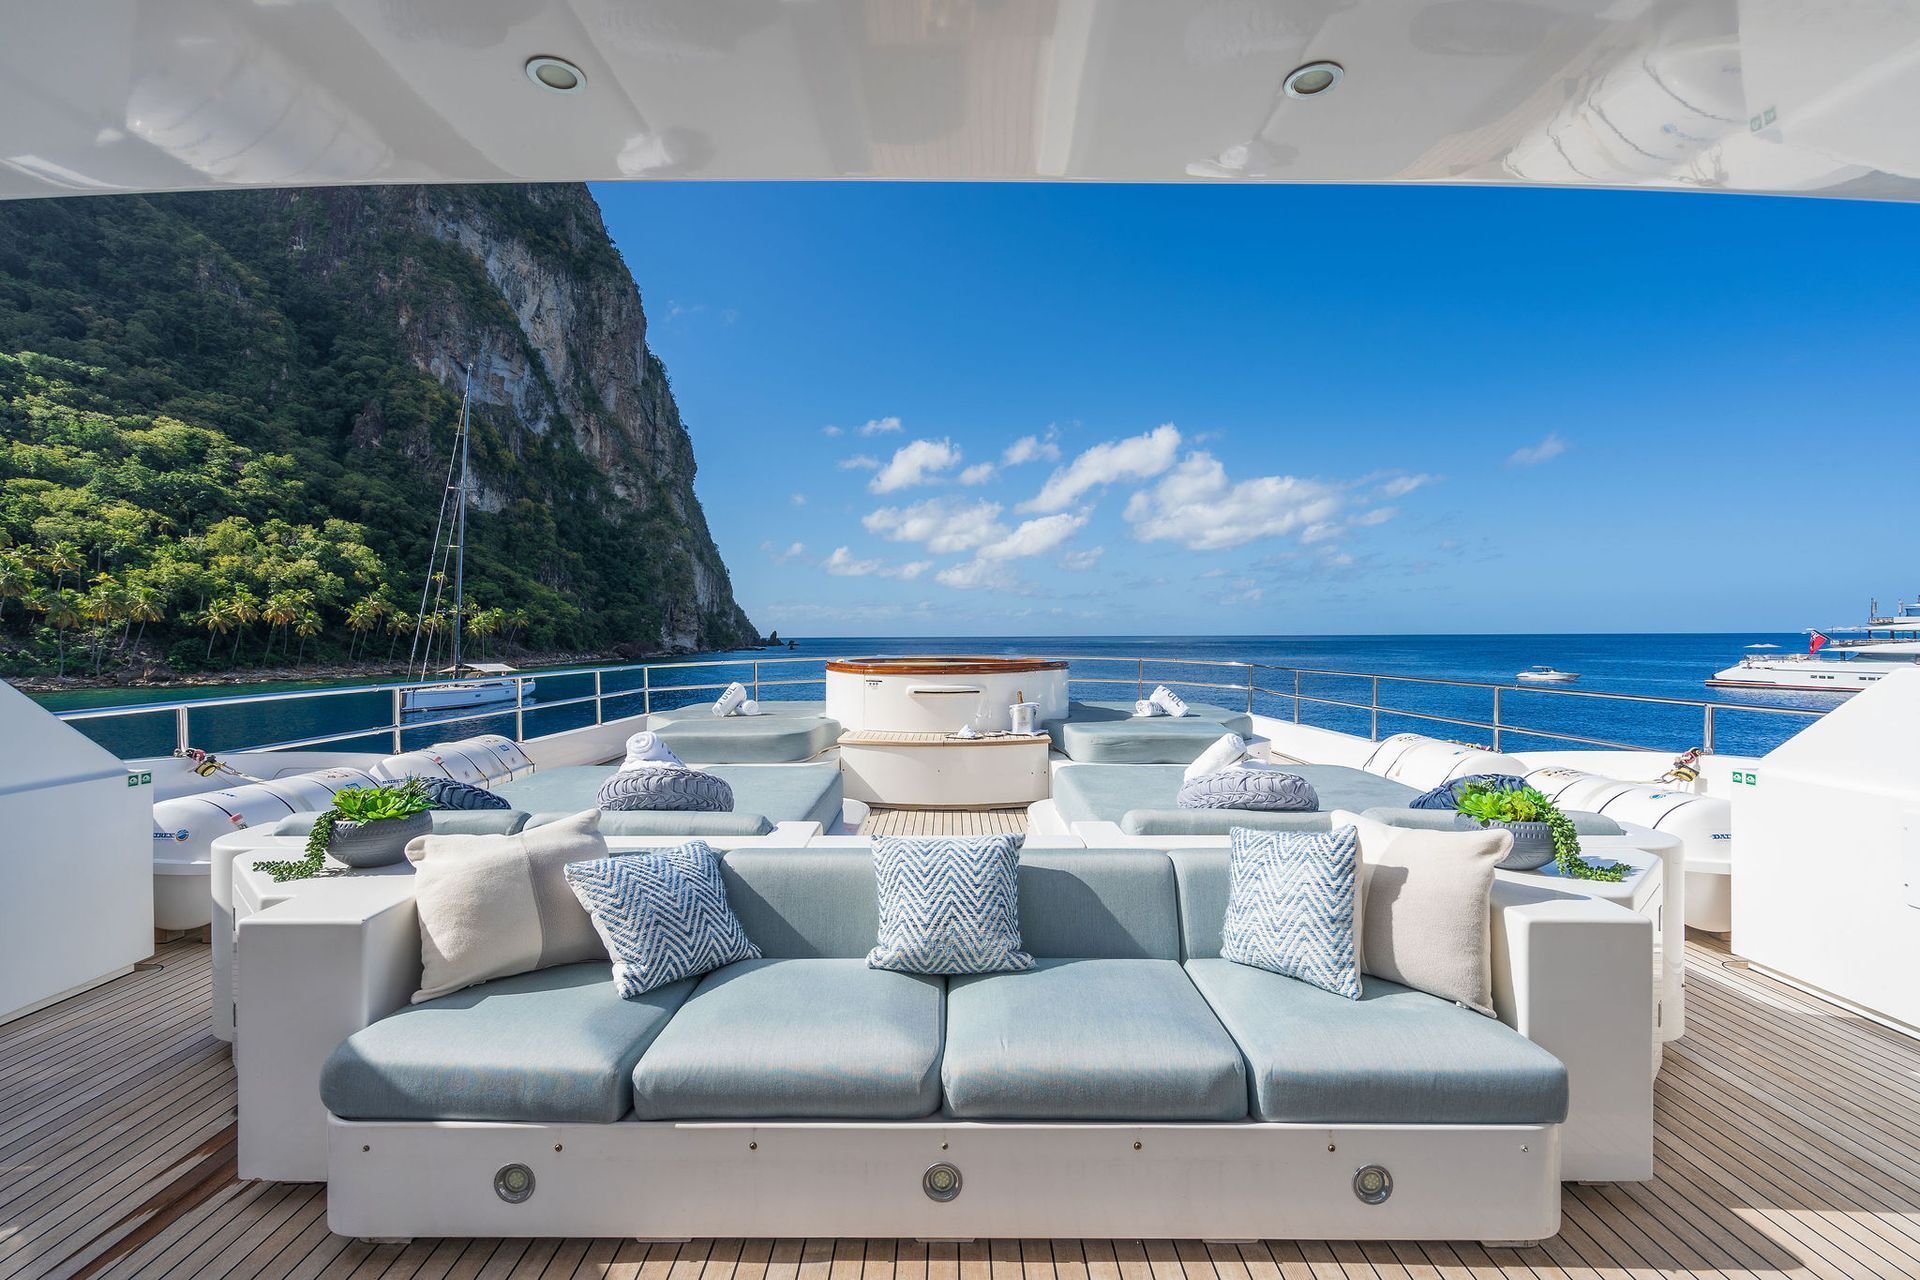 there is a couch on the deck of a yacht with a view of the ocean